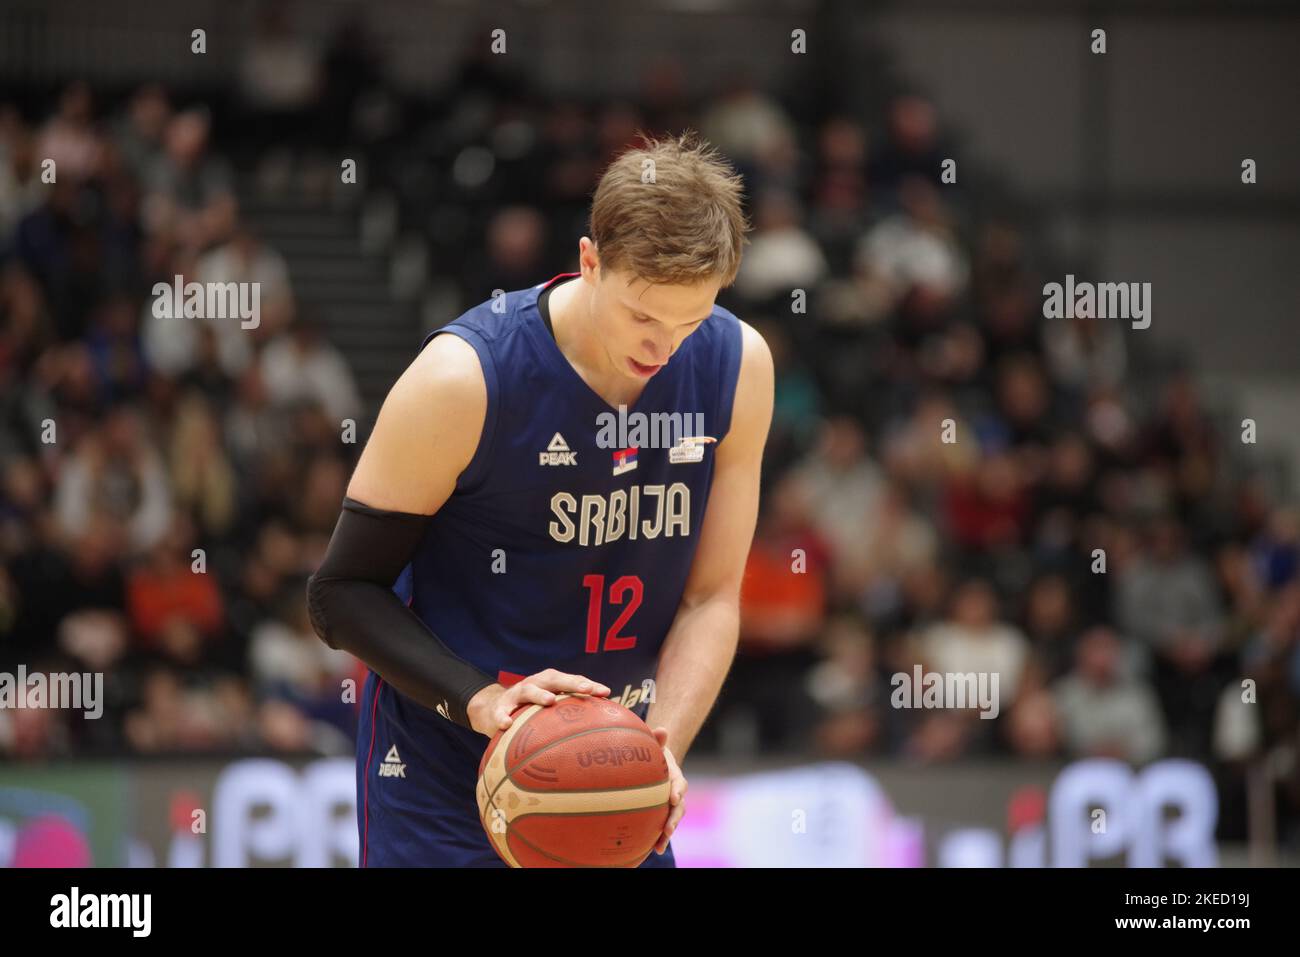 Newcastle upon Tyne, England, 11 November 2022. Aleksa Radanov playing for Serbia against Great Britain in the FIBA Basketball World Cup 2023 Qualifiers at the Vertu Motors Arena. Credit: Colin Edwards/Alamy Live News Stock Photo